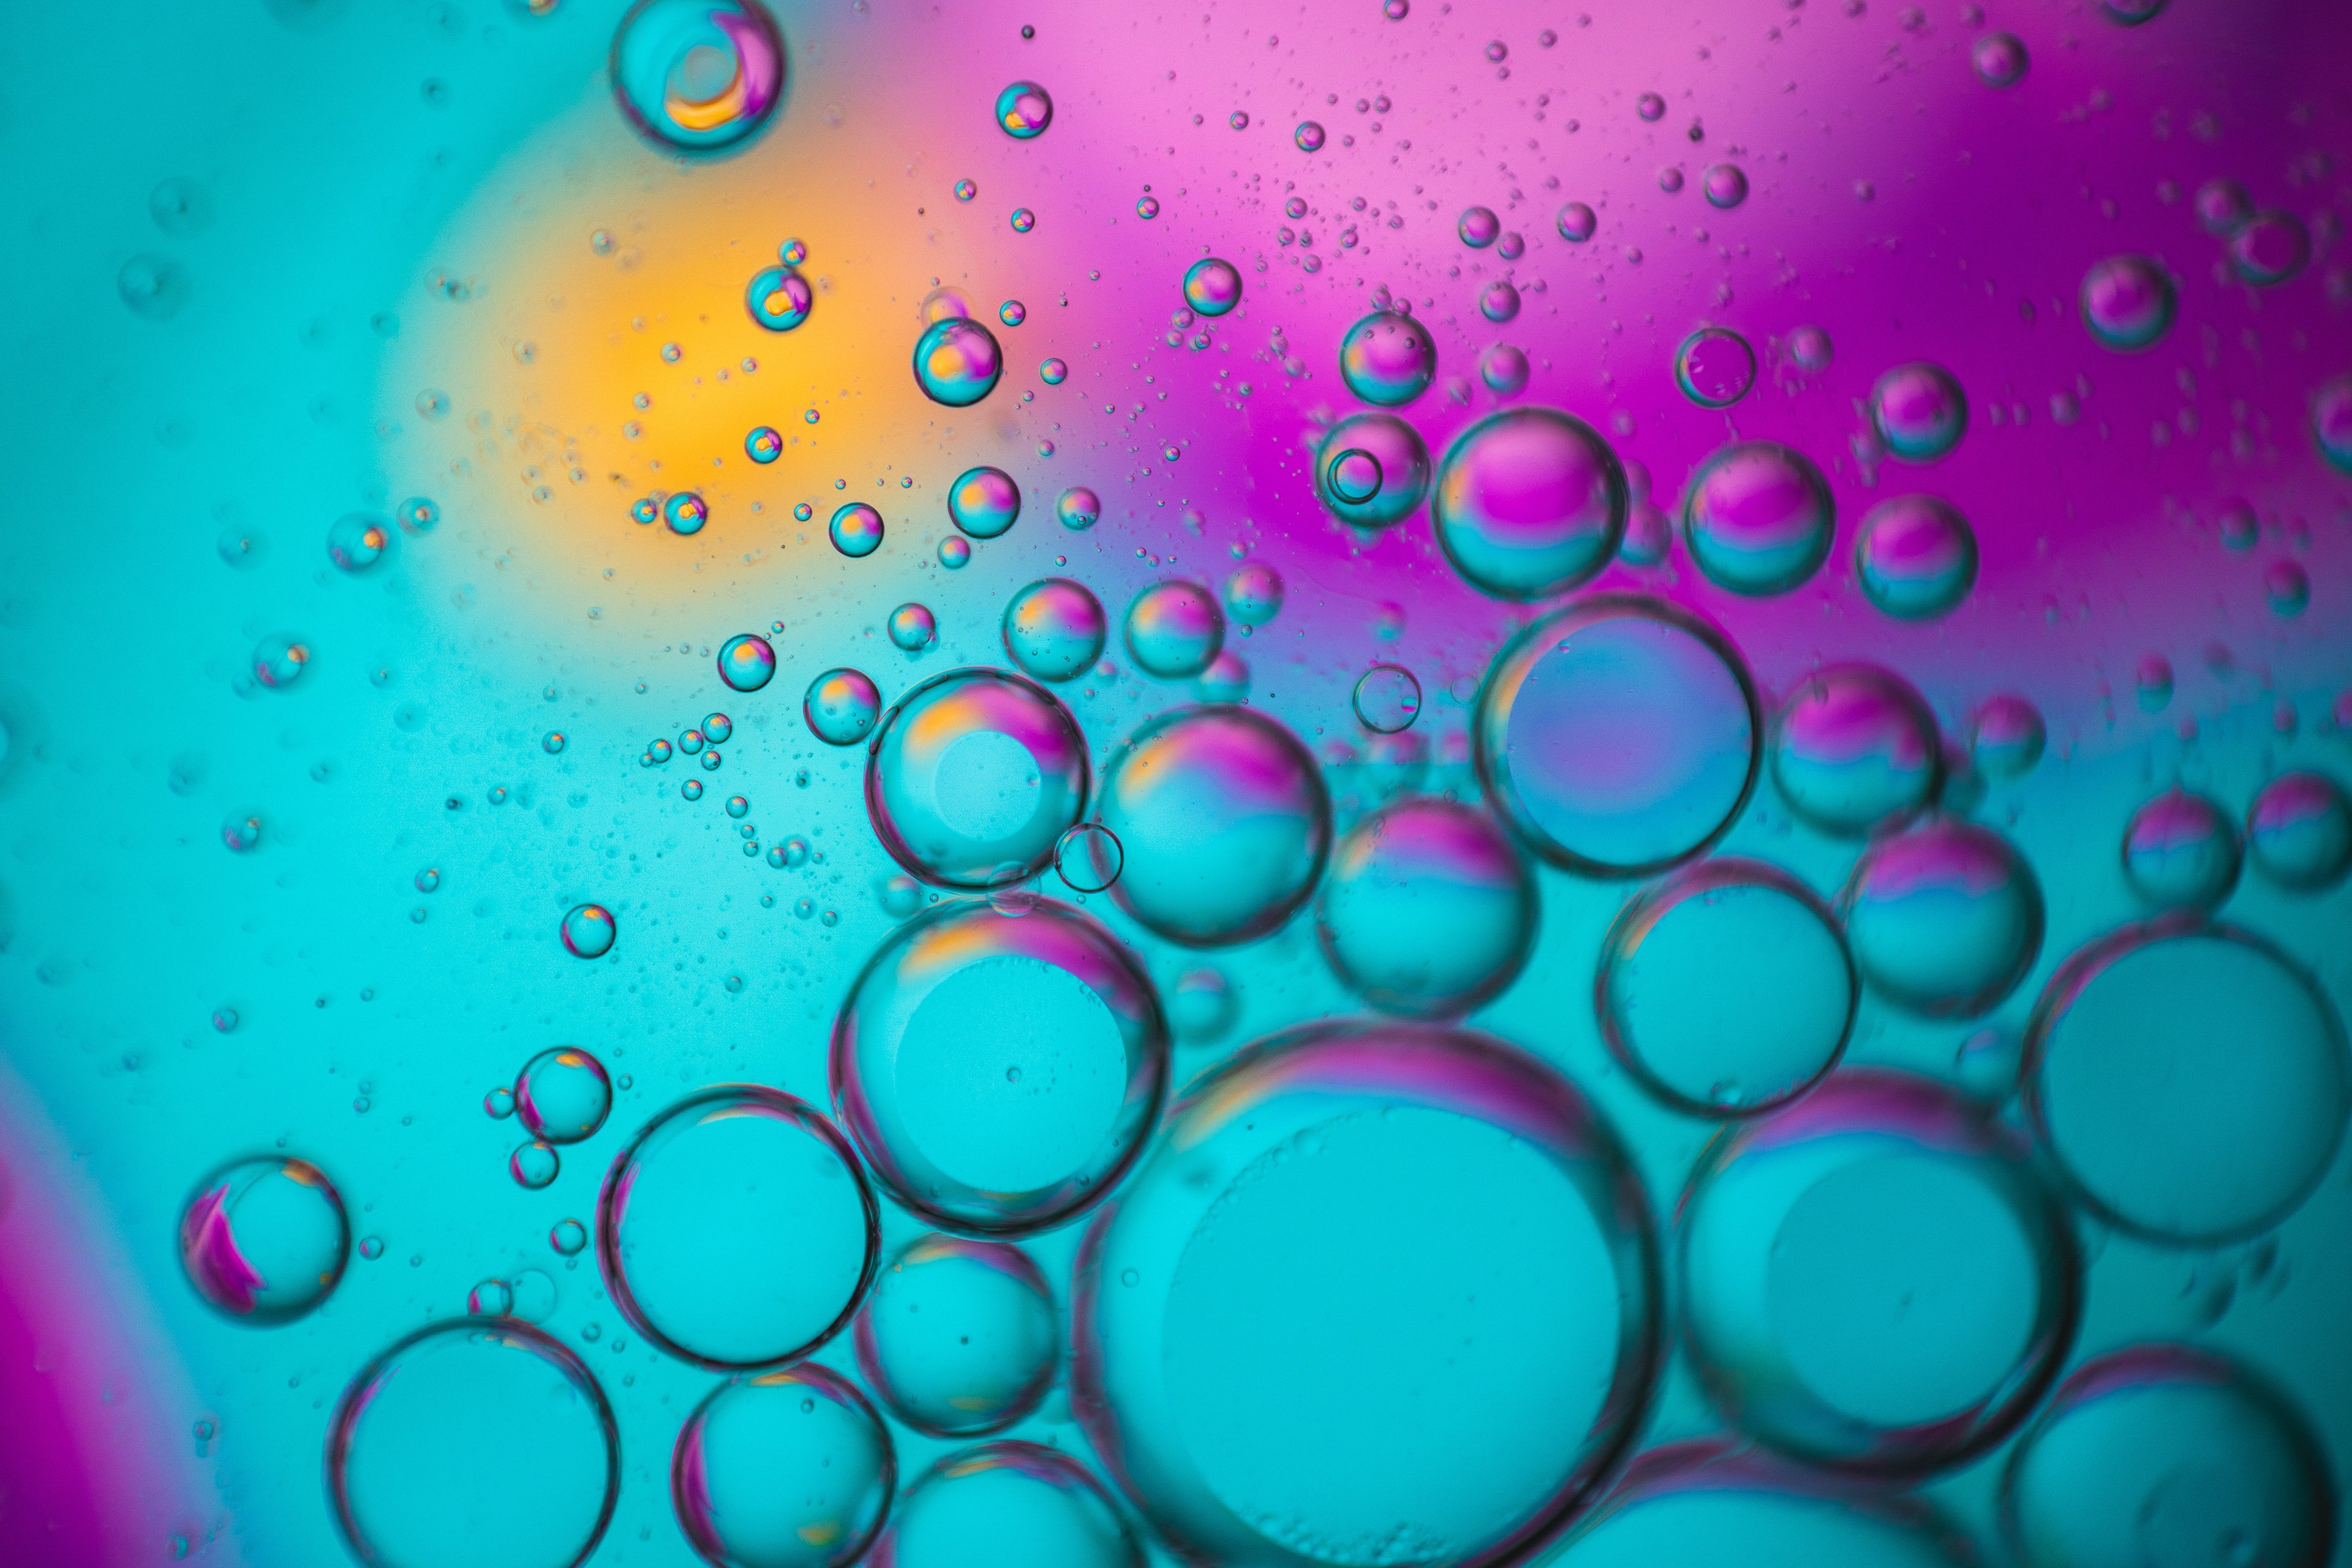 Bubbles Wallpaper 4K, Spectrum, Colorful, Teal, Turquoise, Pink, Abstract